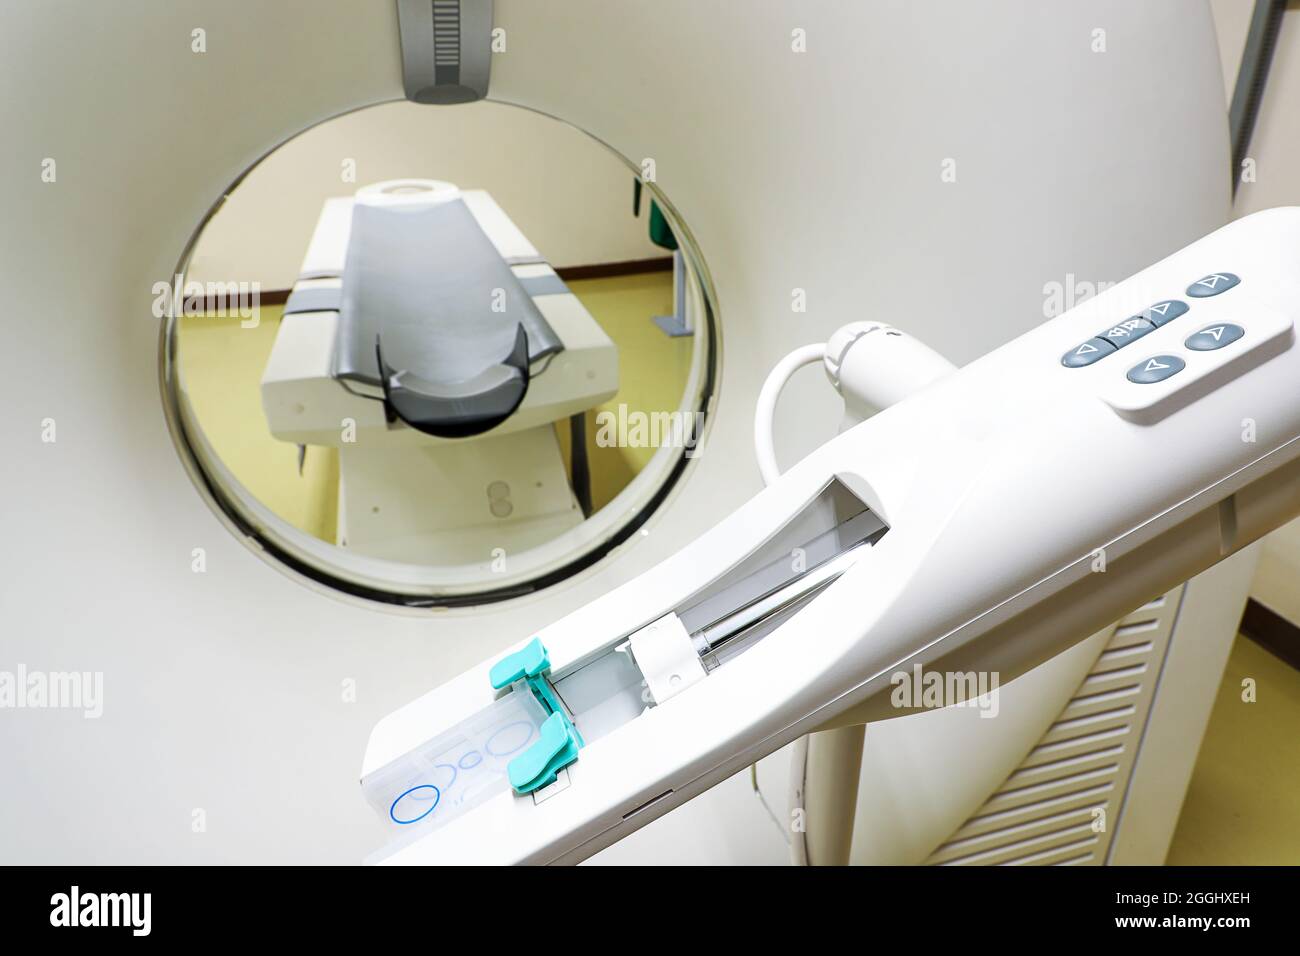 a computer tomography scanner (CT) and a contrast media injector in the radiology department Stock Photo